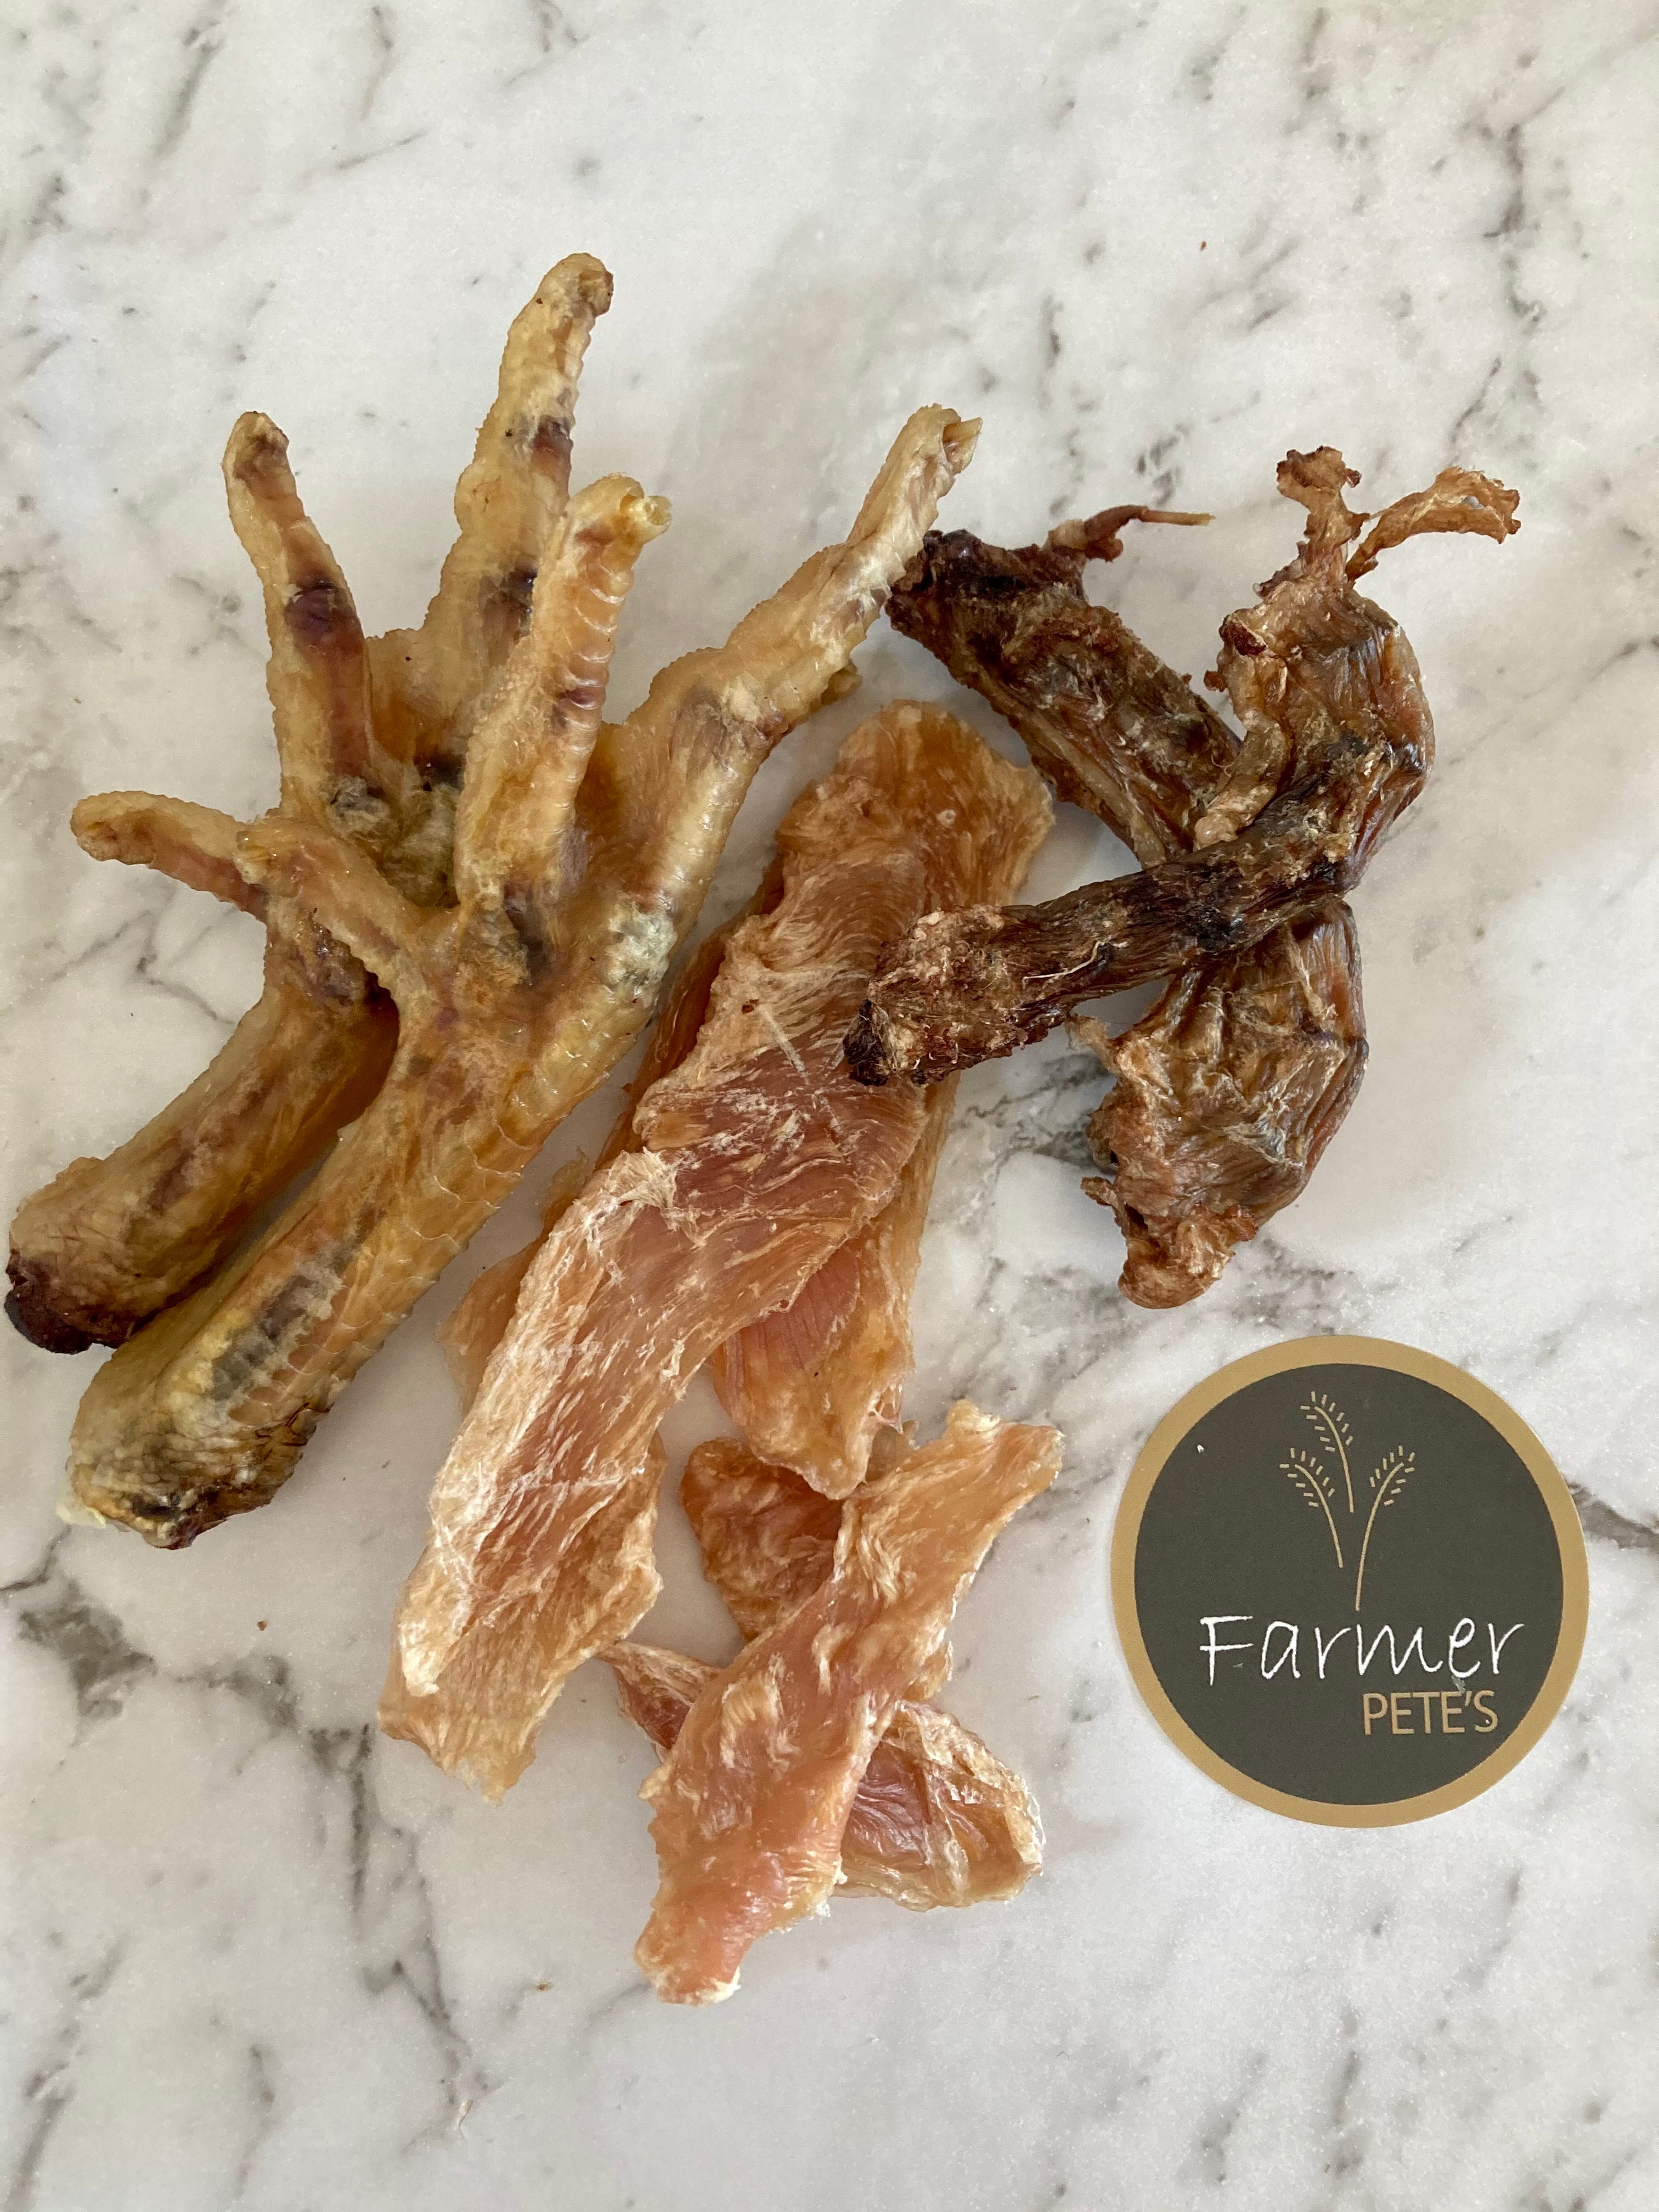 Dehydrated All-natural Chicken Breast Jerky, Jerky Bites, Feet and Necks